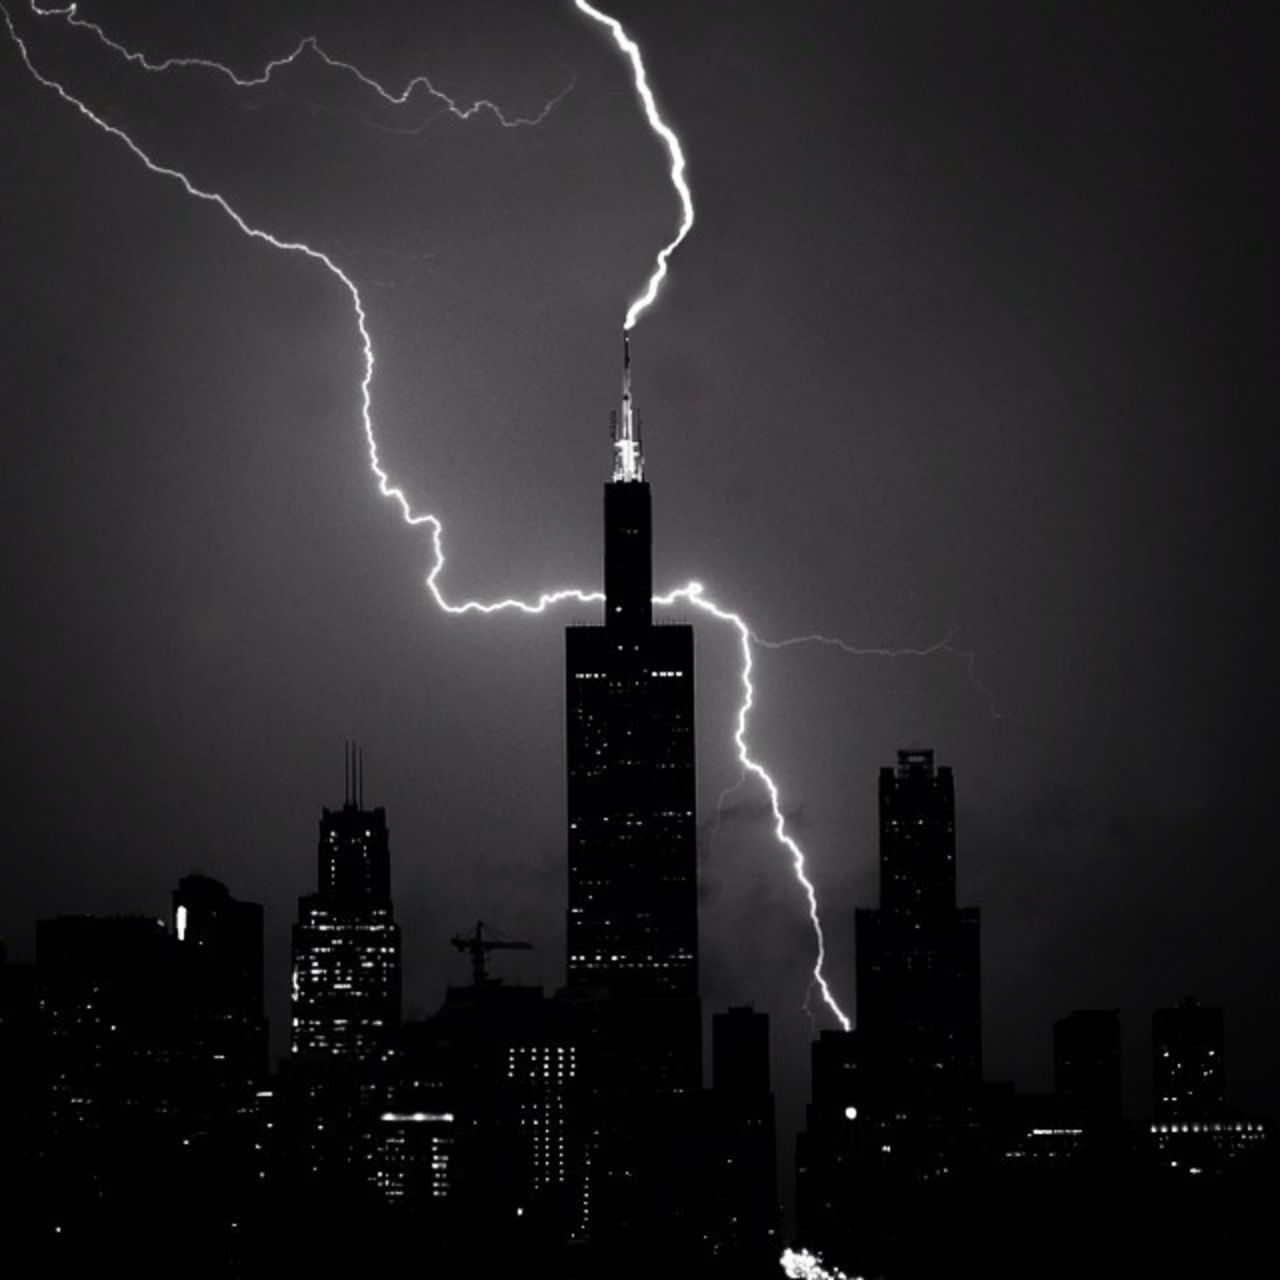 Shooting on a friend's balcony, <a href="https://www.cnn.com/2014/08/15/us/gallery/irpt-lightning-gallery/www.instagram.com/dsowaphoto" target="_blank">David Sowa</a> used a 15-second exposure on his Nikon and an Instagram filter to capture this image of lightning striking the Willis Tower in Chicago in July. 